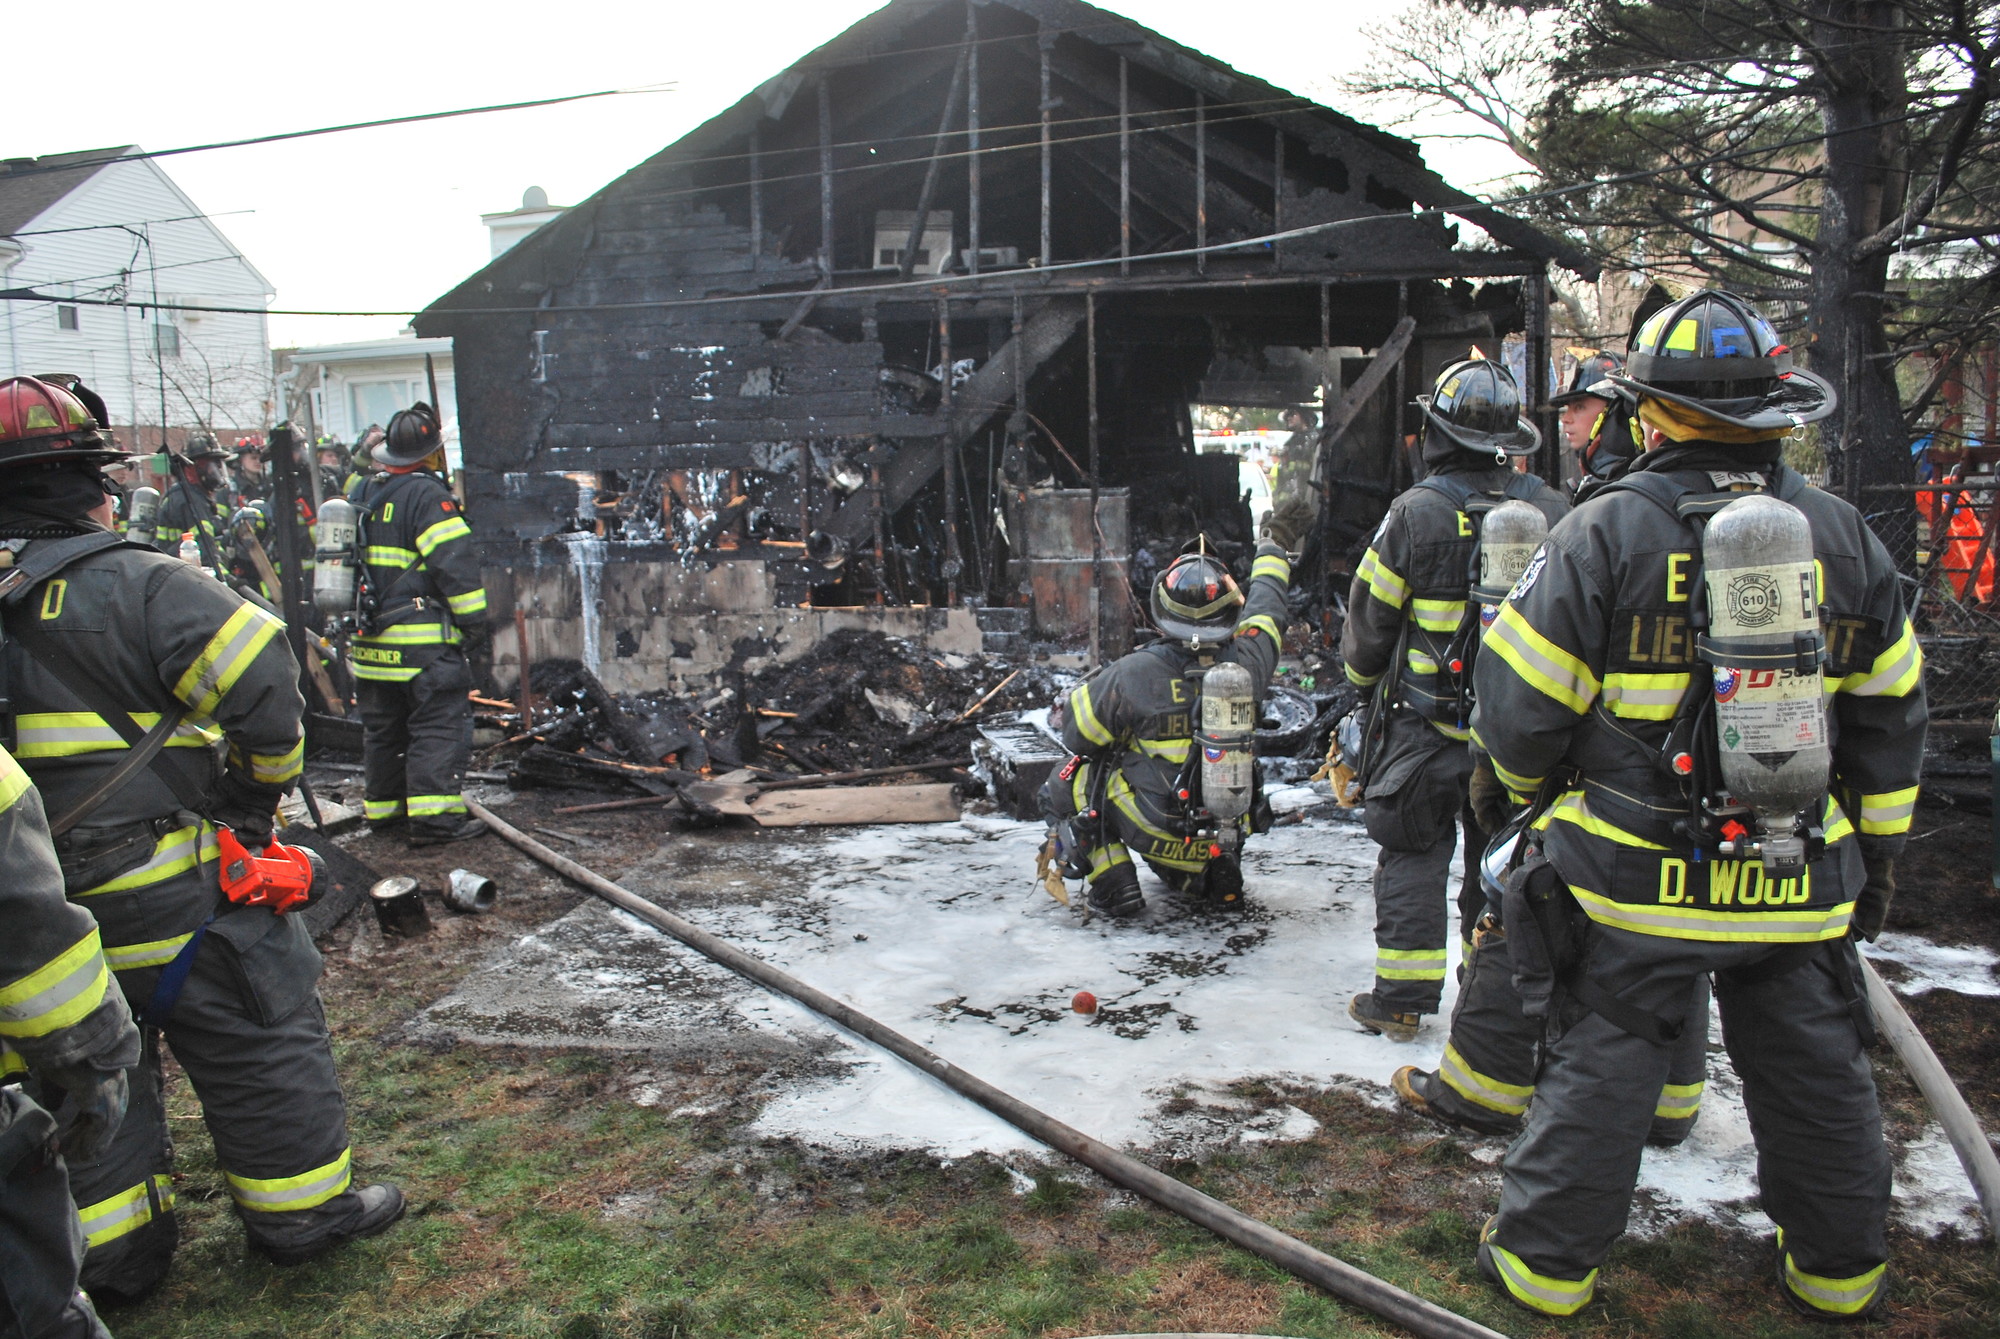 East Meadow Fire Department volunteers extinguished a fire that decimated a garage and shed in a Bright Avenue backyard on Wednesday, shortly before 5 p.m.